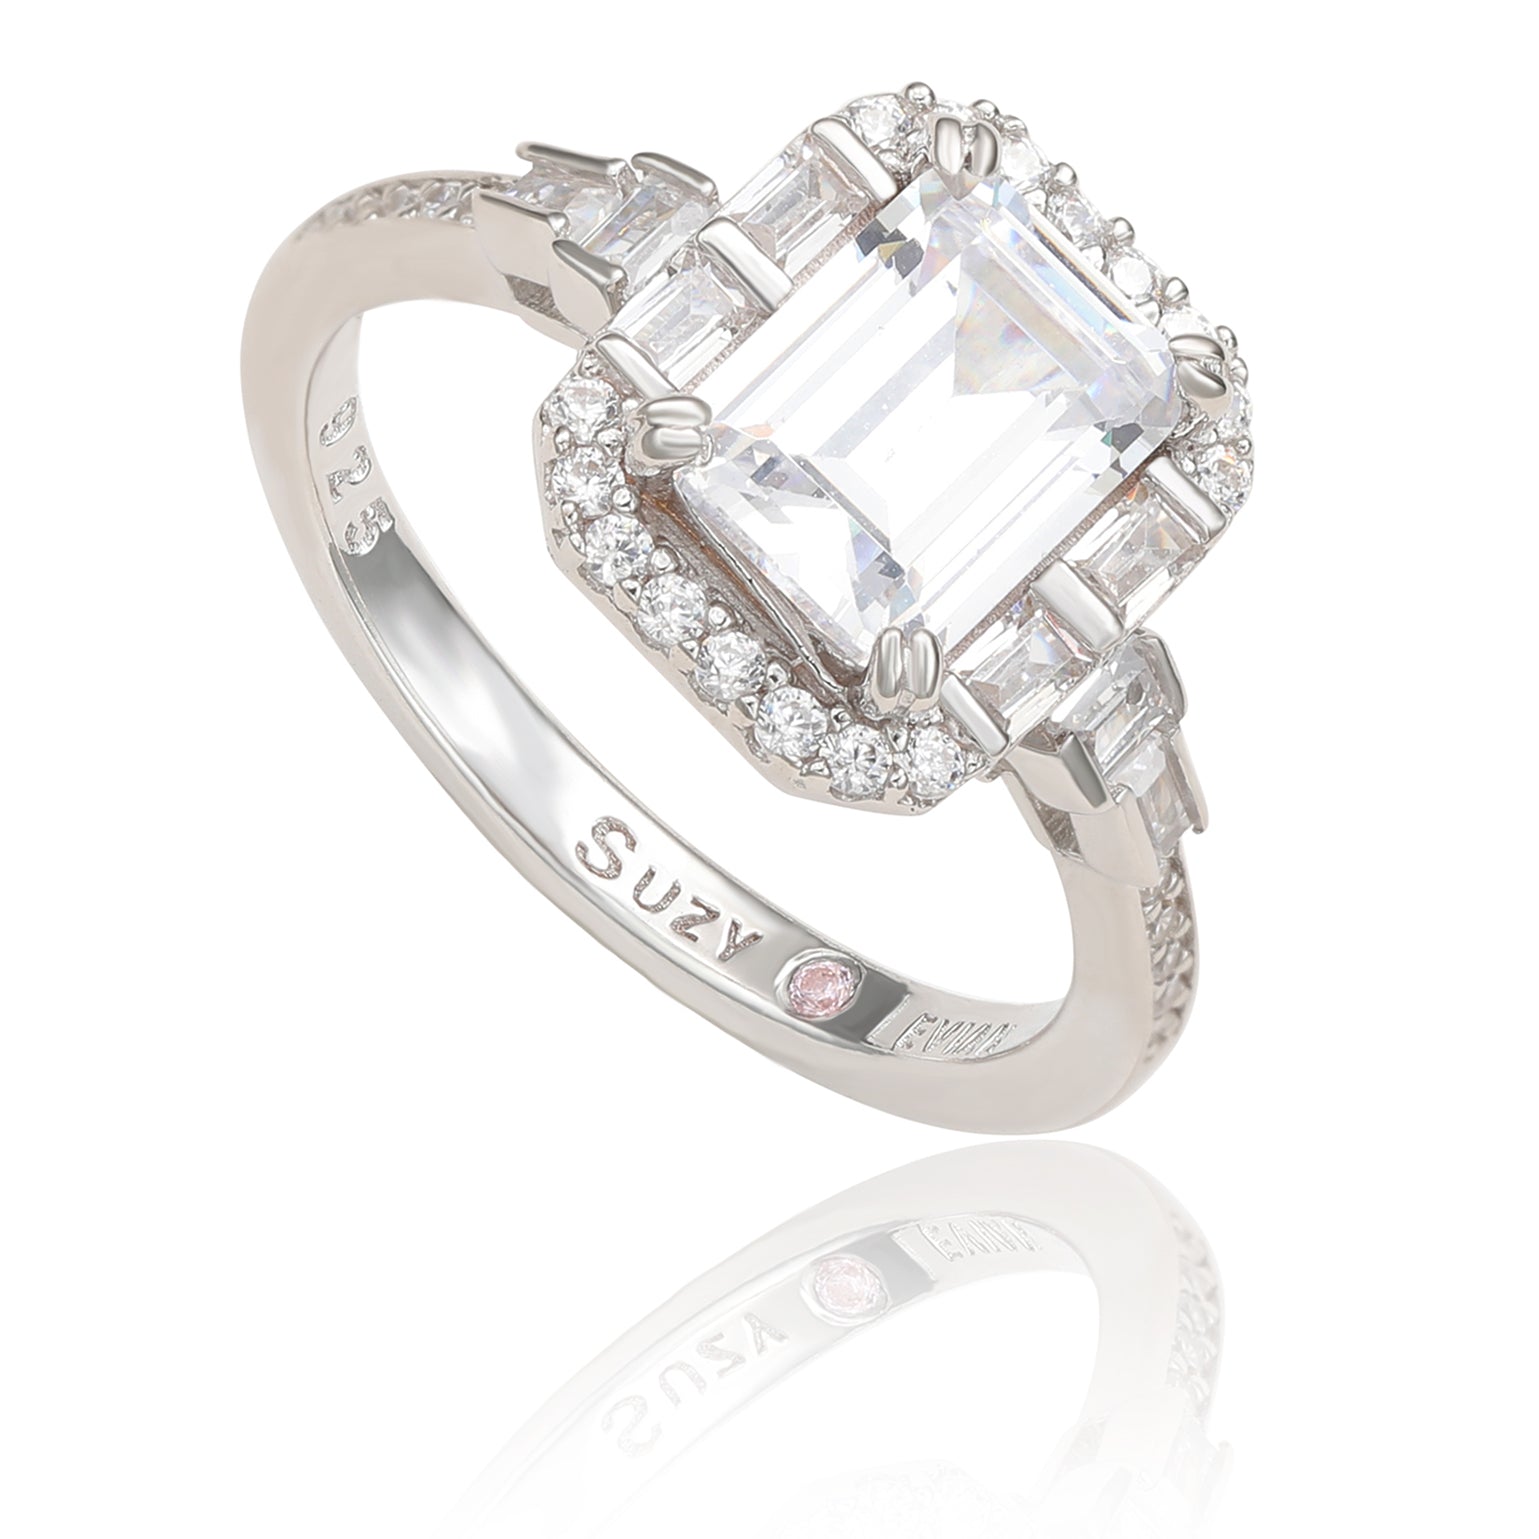 3 Carat Emerald Cut Cubic Zirconia Solitaire Engagement Ring - Yellow Gold  Plated Sterling Silver - Boutique Pavè